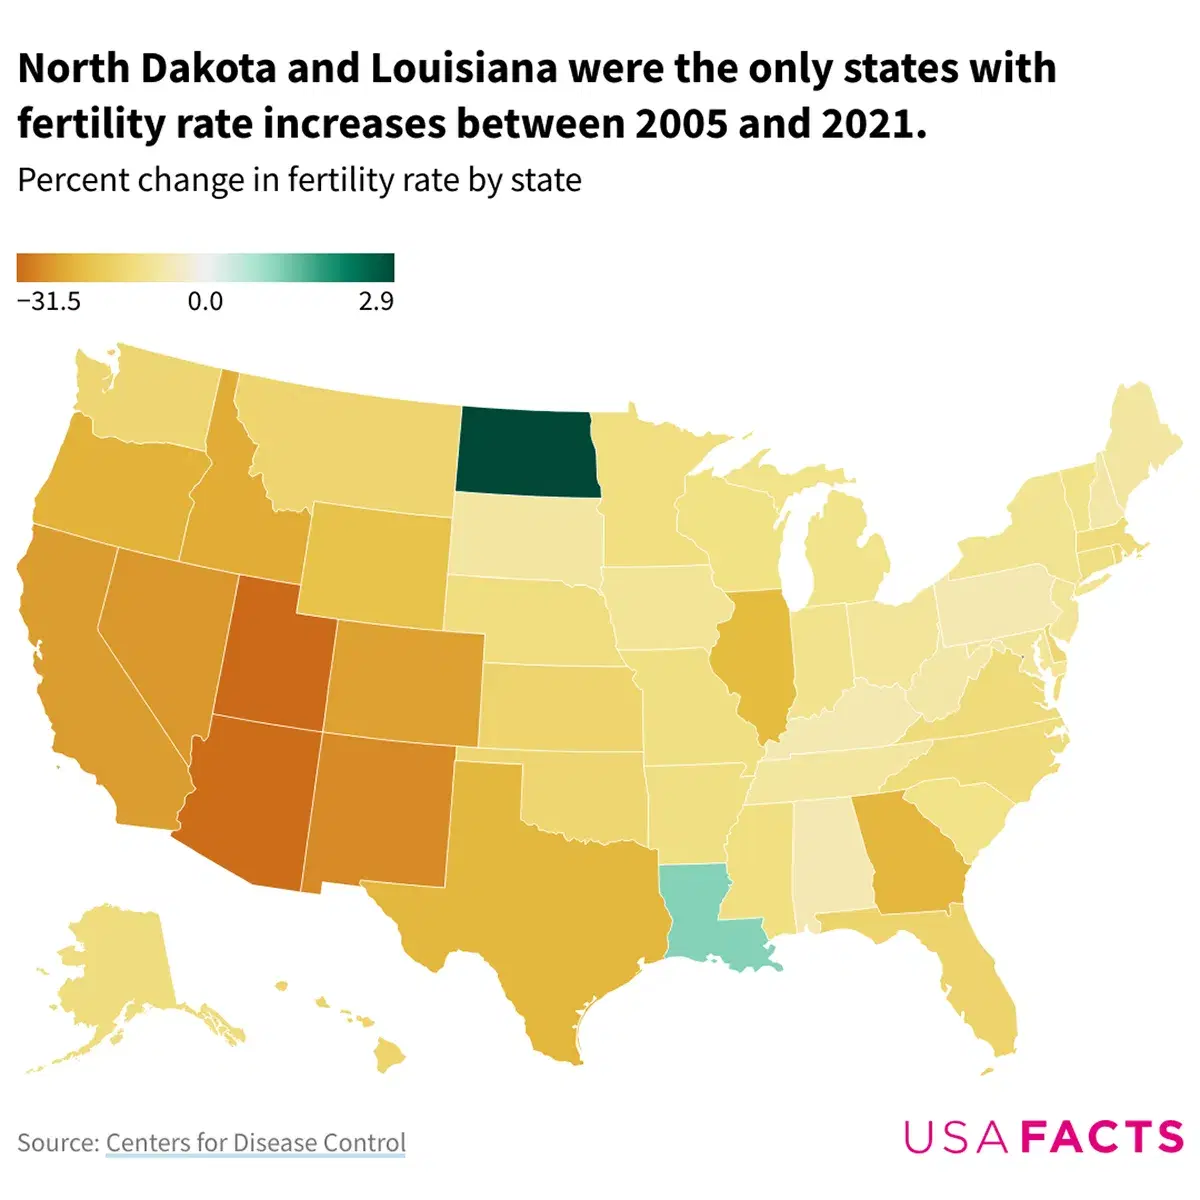 How do fertility rates vary by state over time?